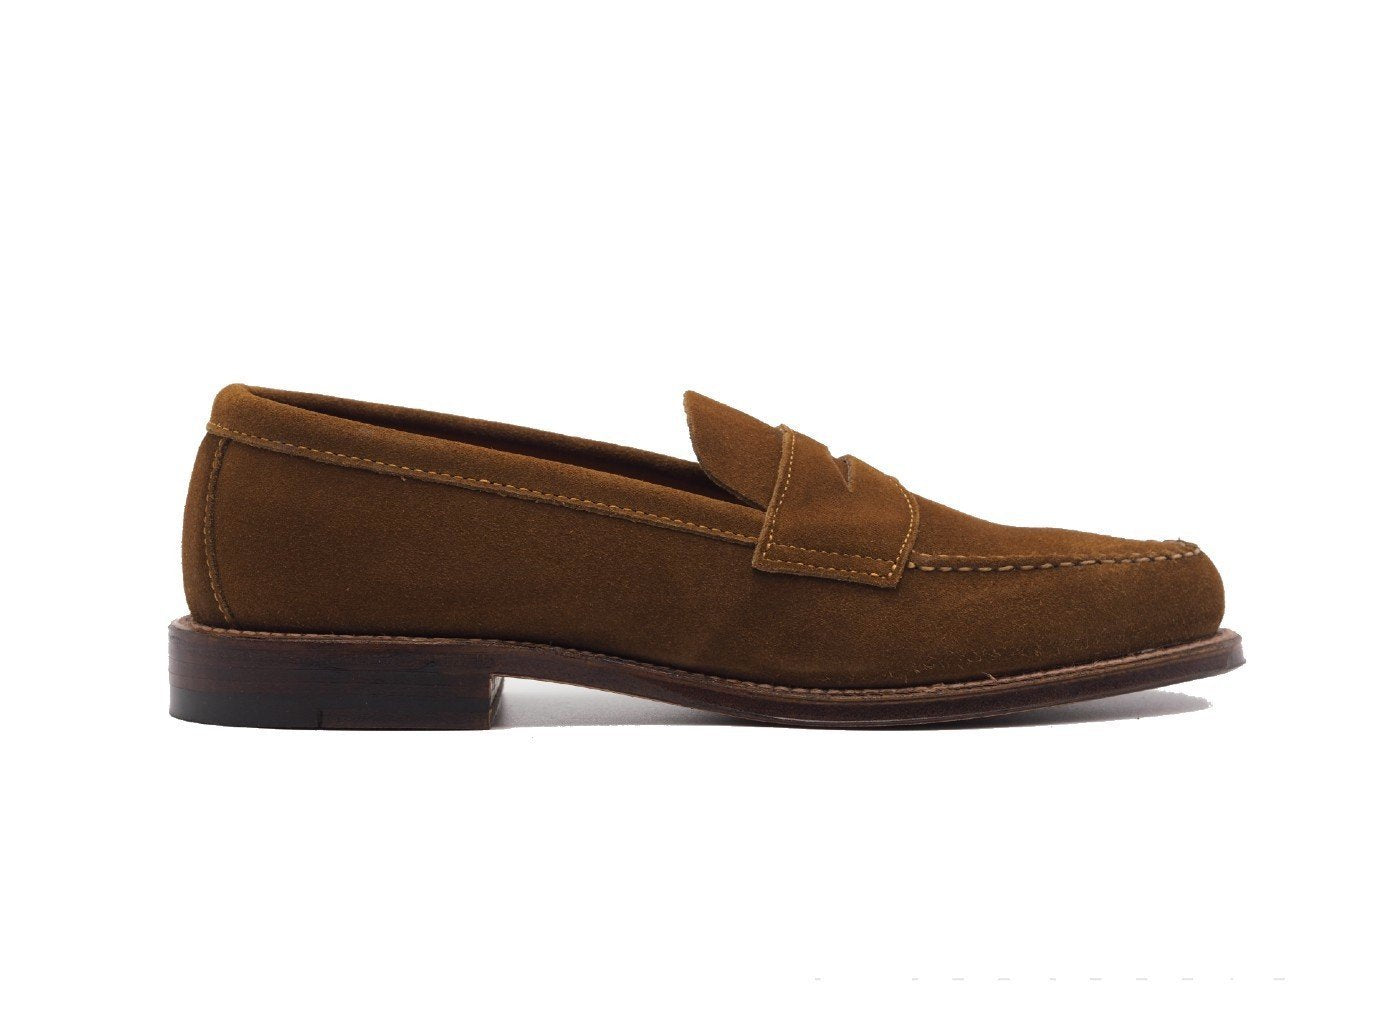 Alden Unlined Handsewn Penny Loafer Snuff Suede – Double Monk